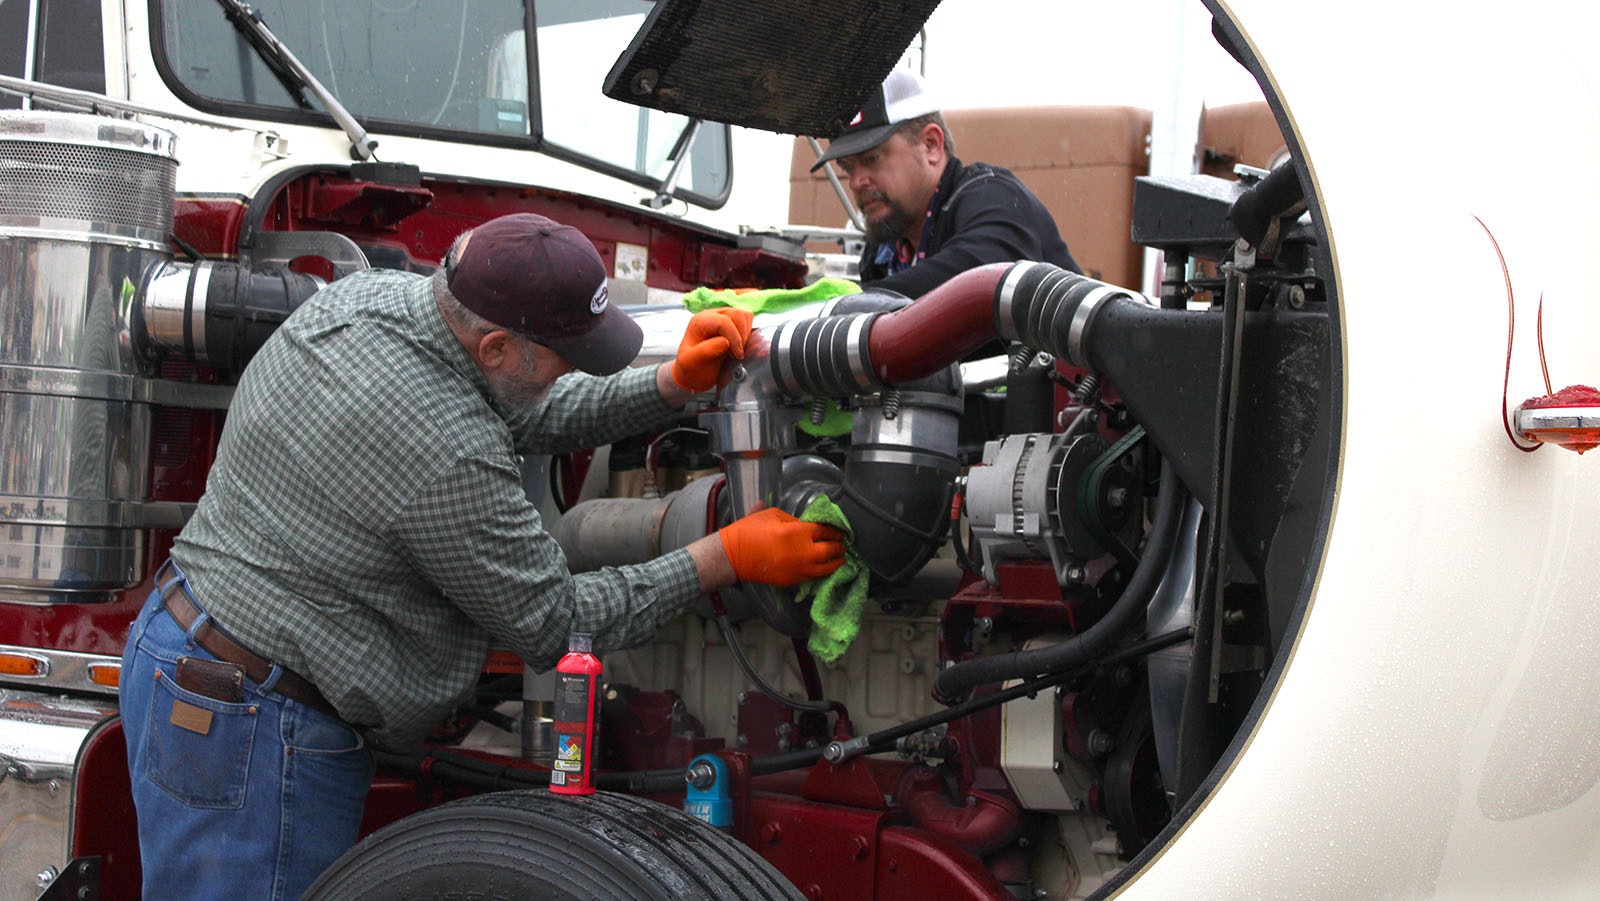 Clyde Green cleans up the engine of his truck before judging at the Shell Rotella Super Rigs Truck Show in Gillette on Saturday.